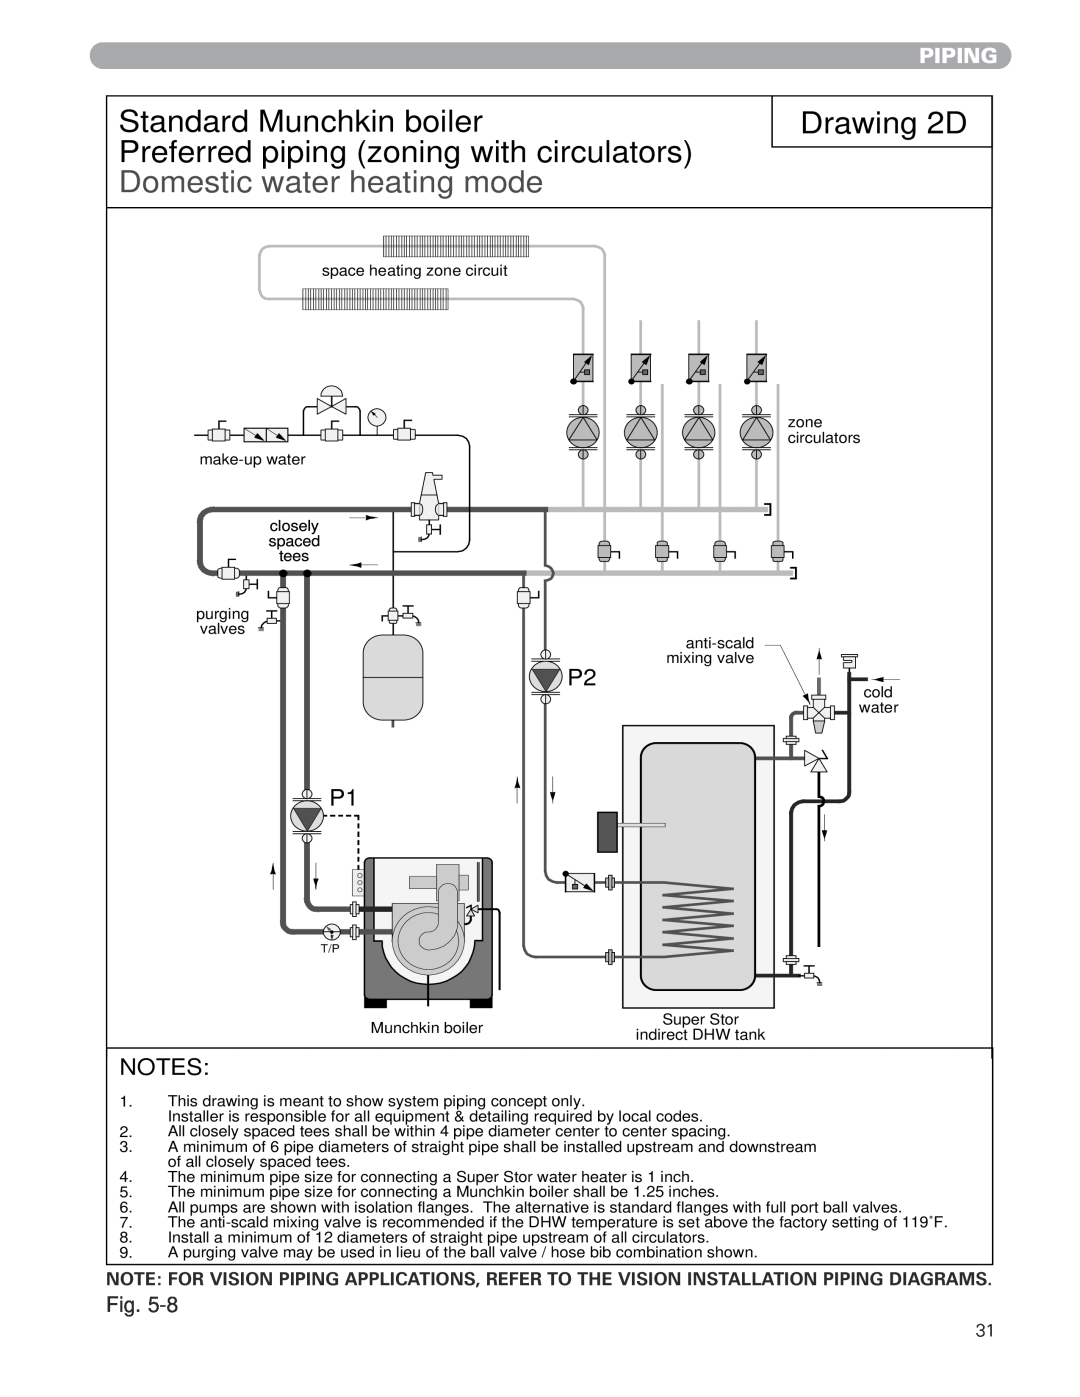 Munchkin MUNCHKIN HIGH EFFICIENCY HEATER with the "925" Controller Drawing 2D, Standard Munchkin boiler, Piping, closely 